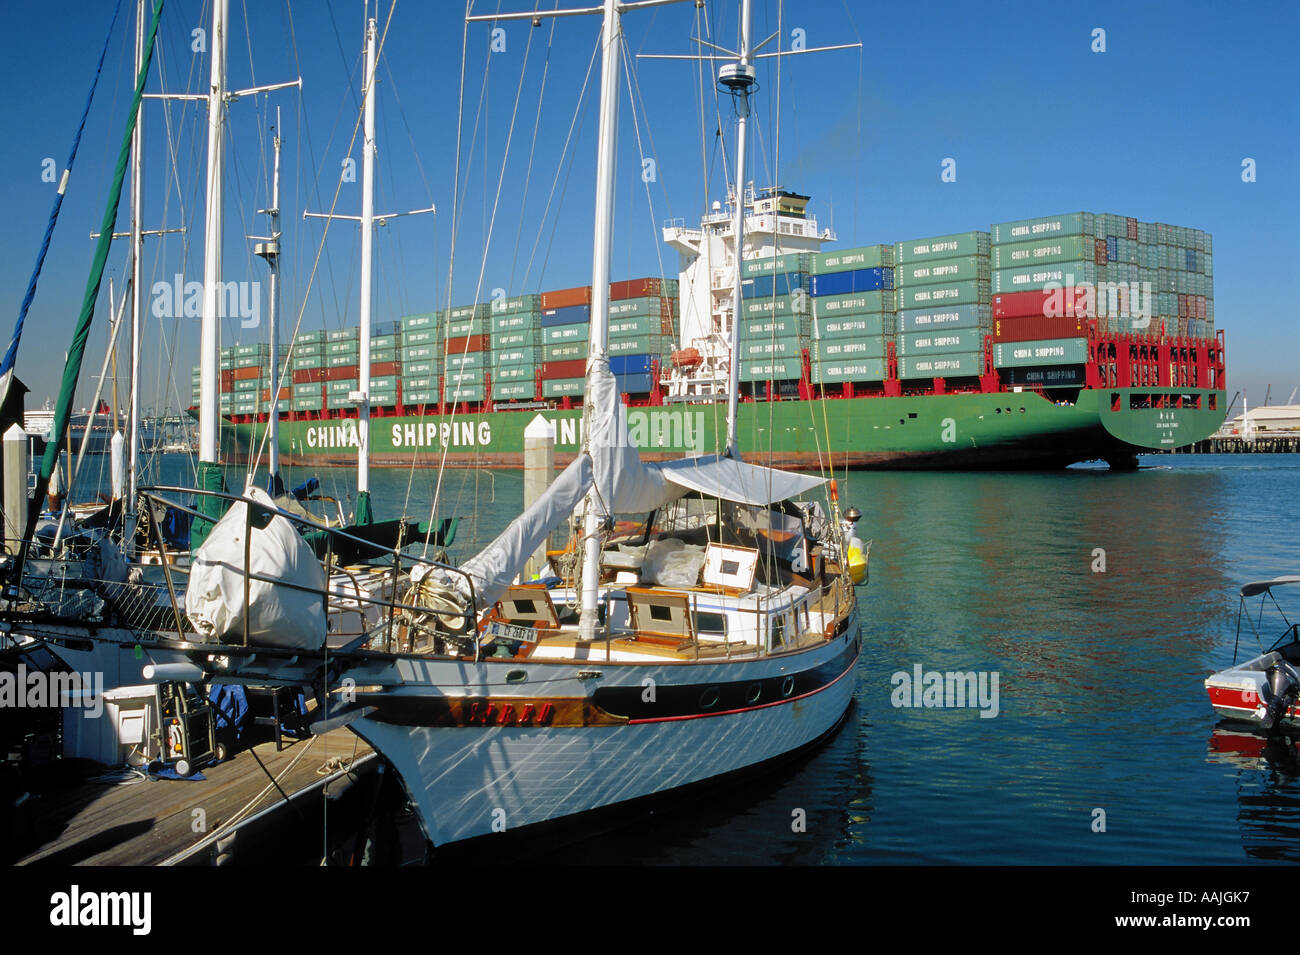 China Shipping container ship arriving through the main channel in San Pedro Harbor, Los Angeles, California Stock Photo